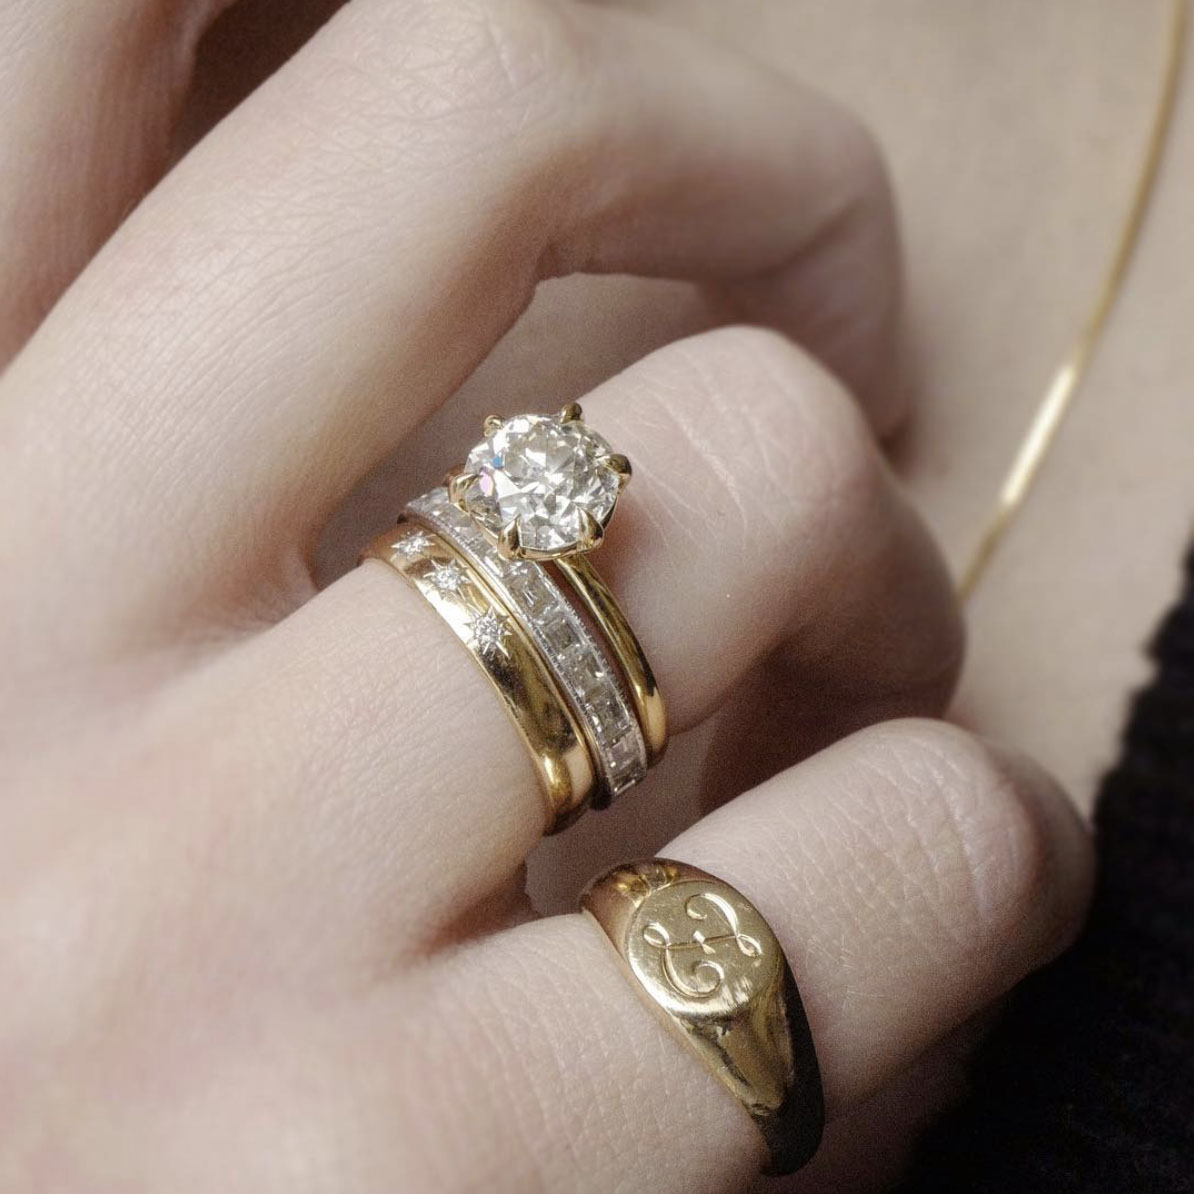 Stackable Wedding Bands Are One Of Our Favorite Jewelry Trends (PHOTOS) |  HuffPost Life